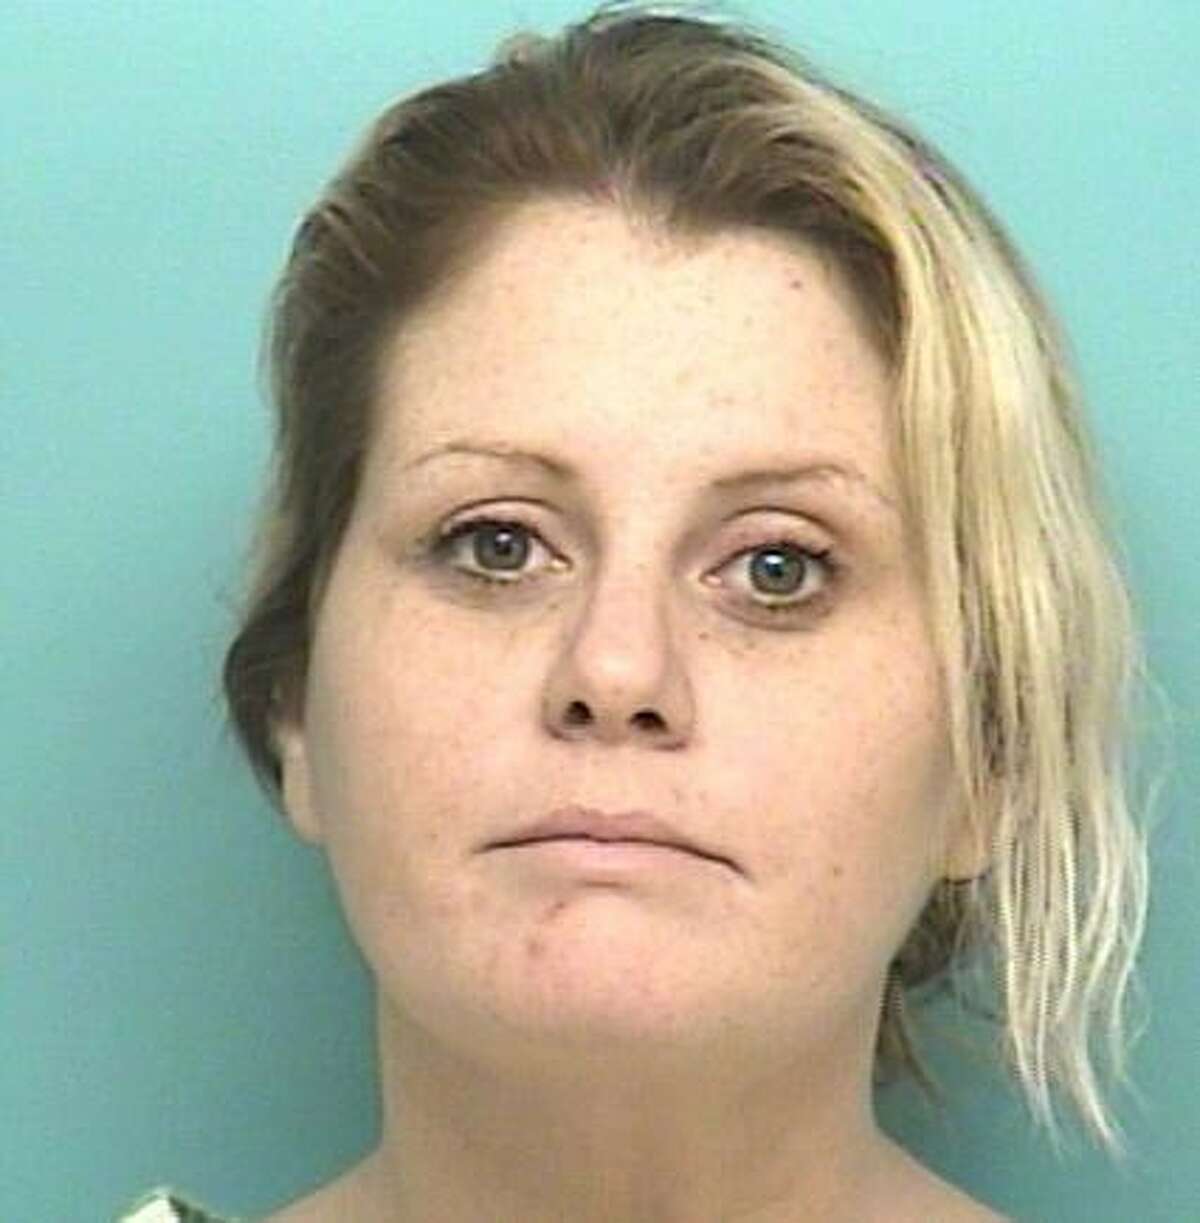 JACQUEZ, Nina NicoleWhite/Female DOB: 01/22/1981Height: 5’06’’ Weight: 230 lbs.Hair: Red/Aubu Eyes: GreenWarrant # 120303441 Bond ForfeiturePossession of a Controlled SubstanceLKA: Edgefield Ln., Conroe.